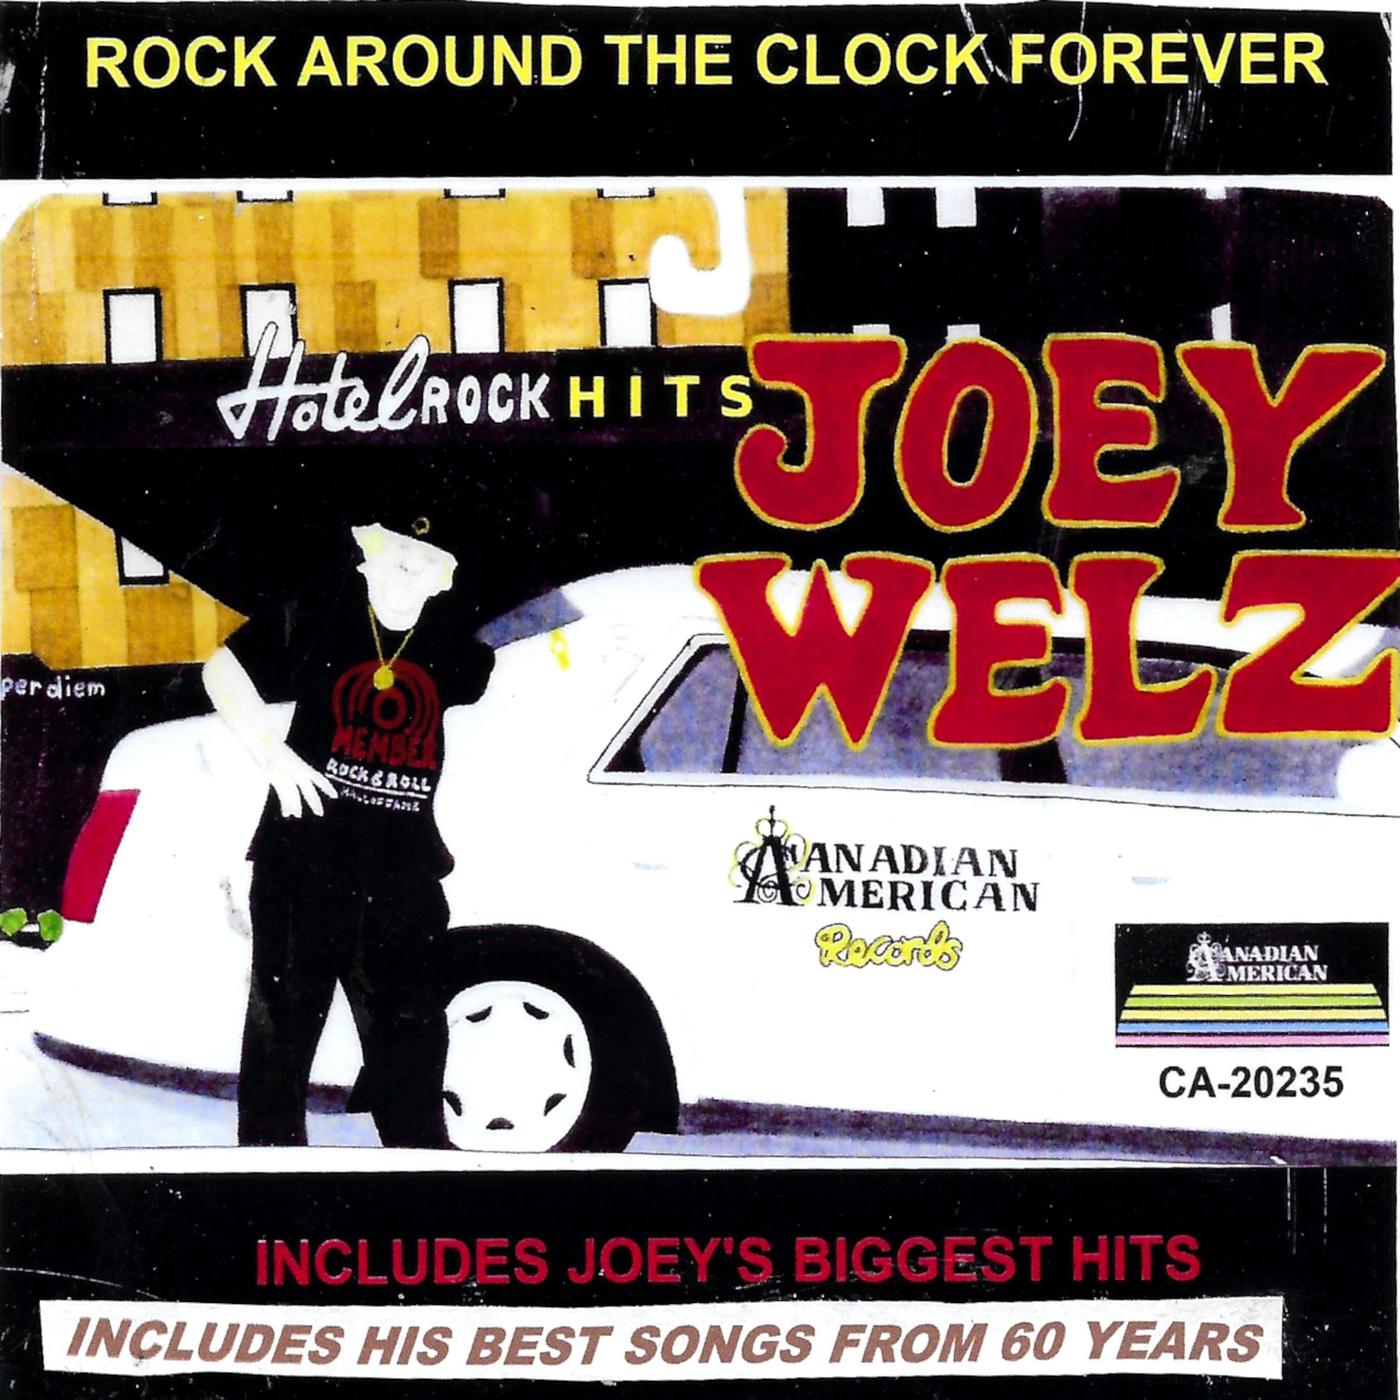 Joey Welz - God Will Always Be There